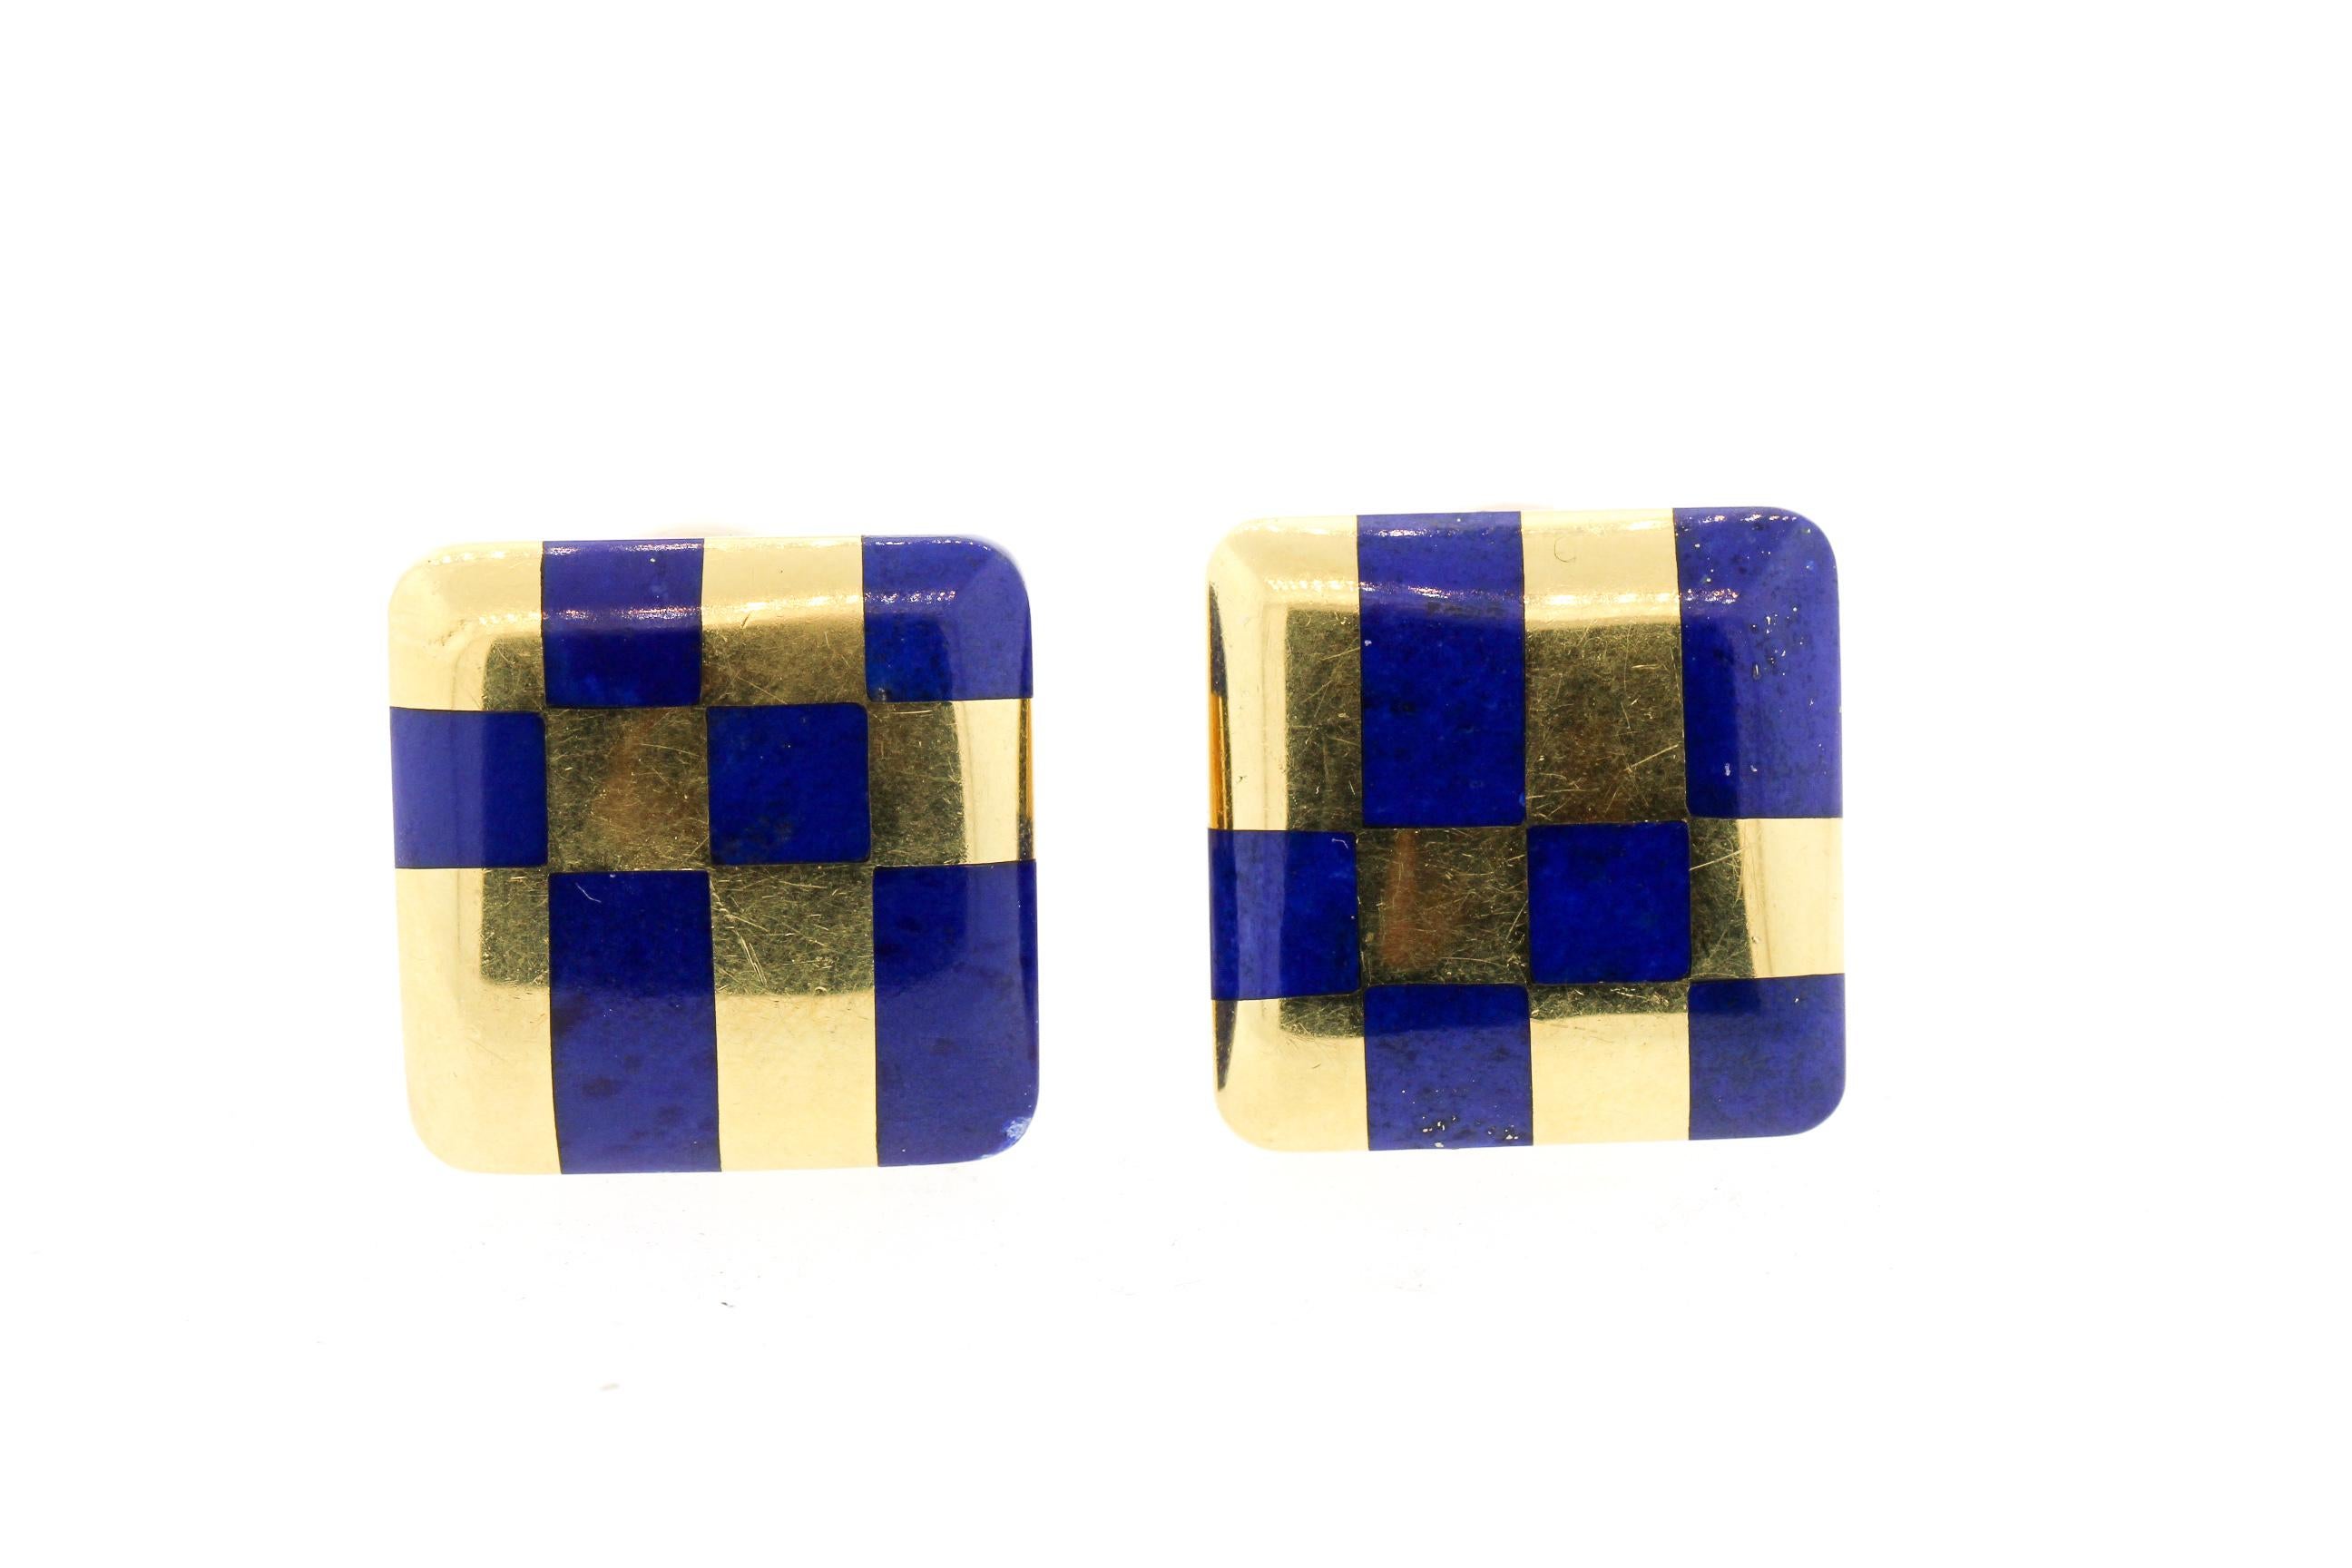 Classic inlaid lapis and 18k yellow gold checker earrings designed by Angela Cummings and retailed by Tiffany & Co. circa 1980. These earrings are meant to be opposites of each other and are bold in design and color. The earrings are marked Tiffany